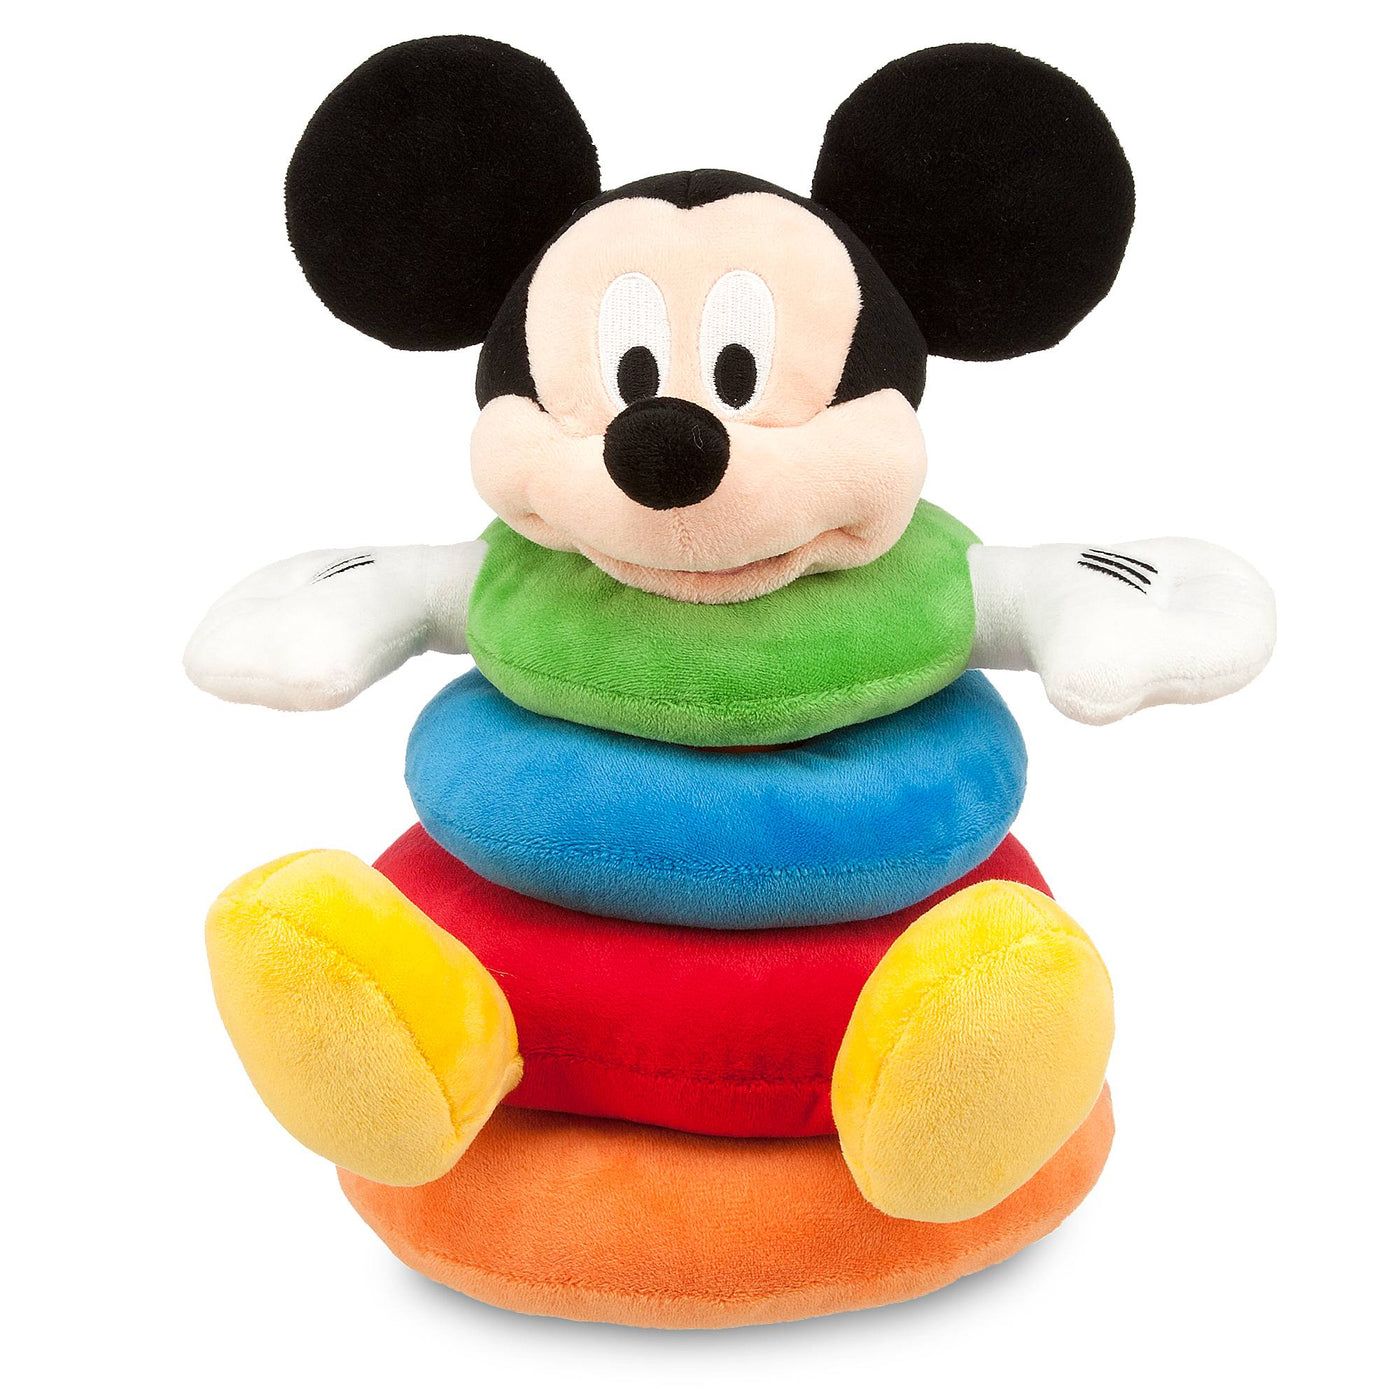 baby mickey mouse plush